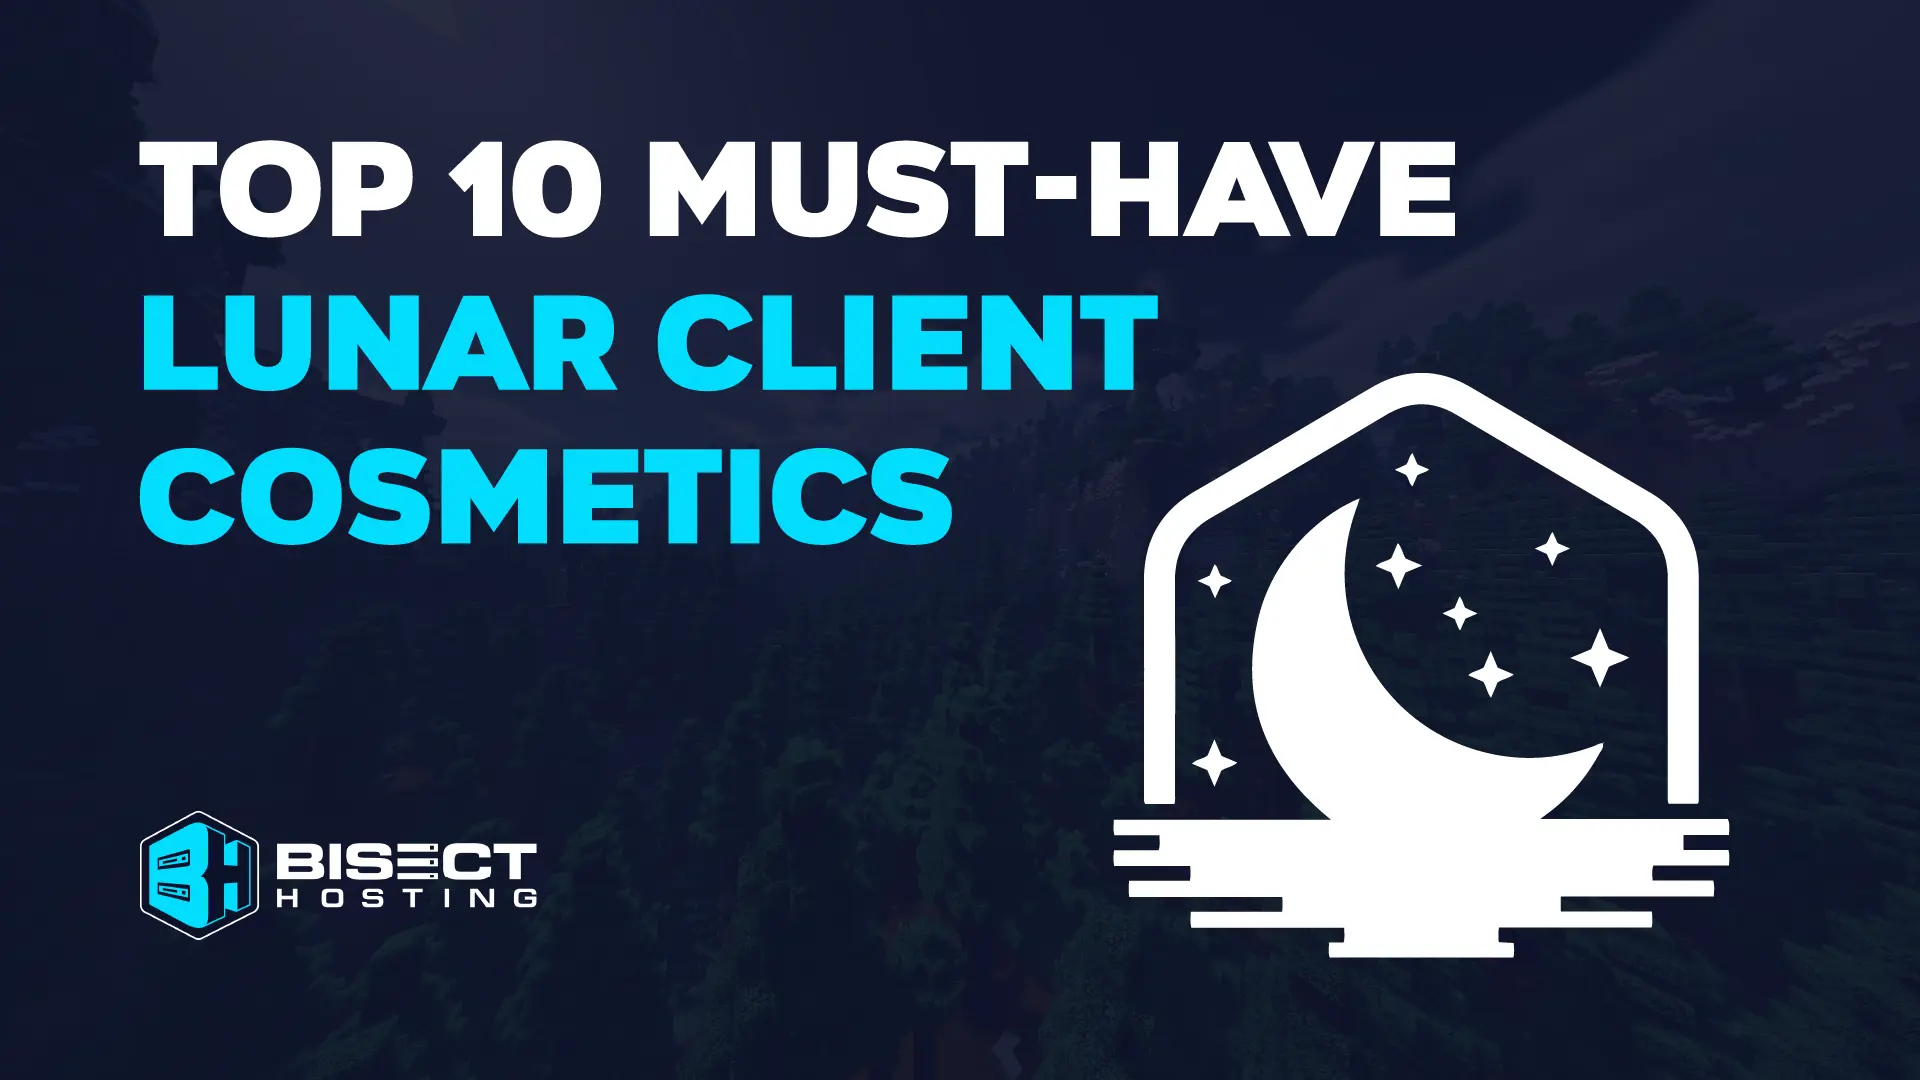 Top 10 Must-Have Lunar Client Cosmetics